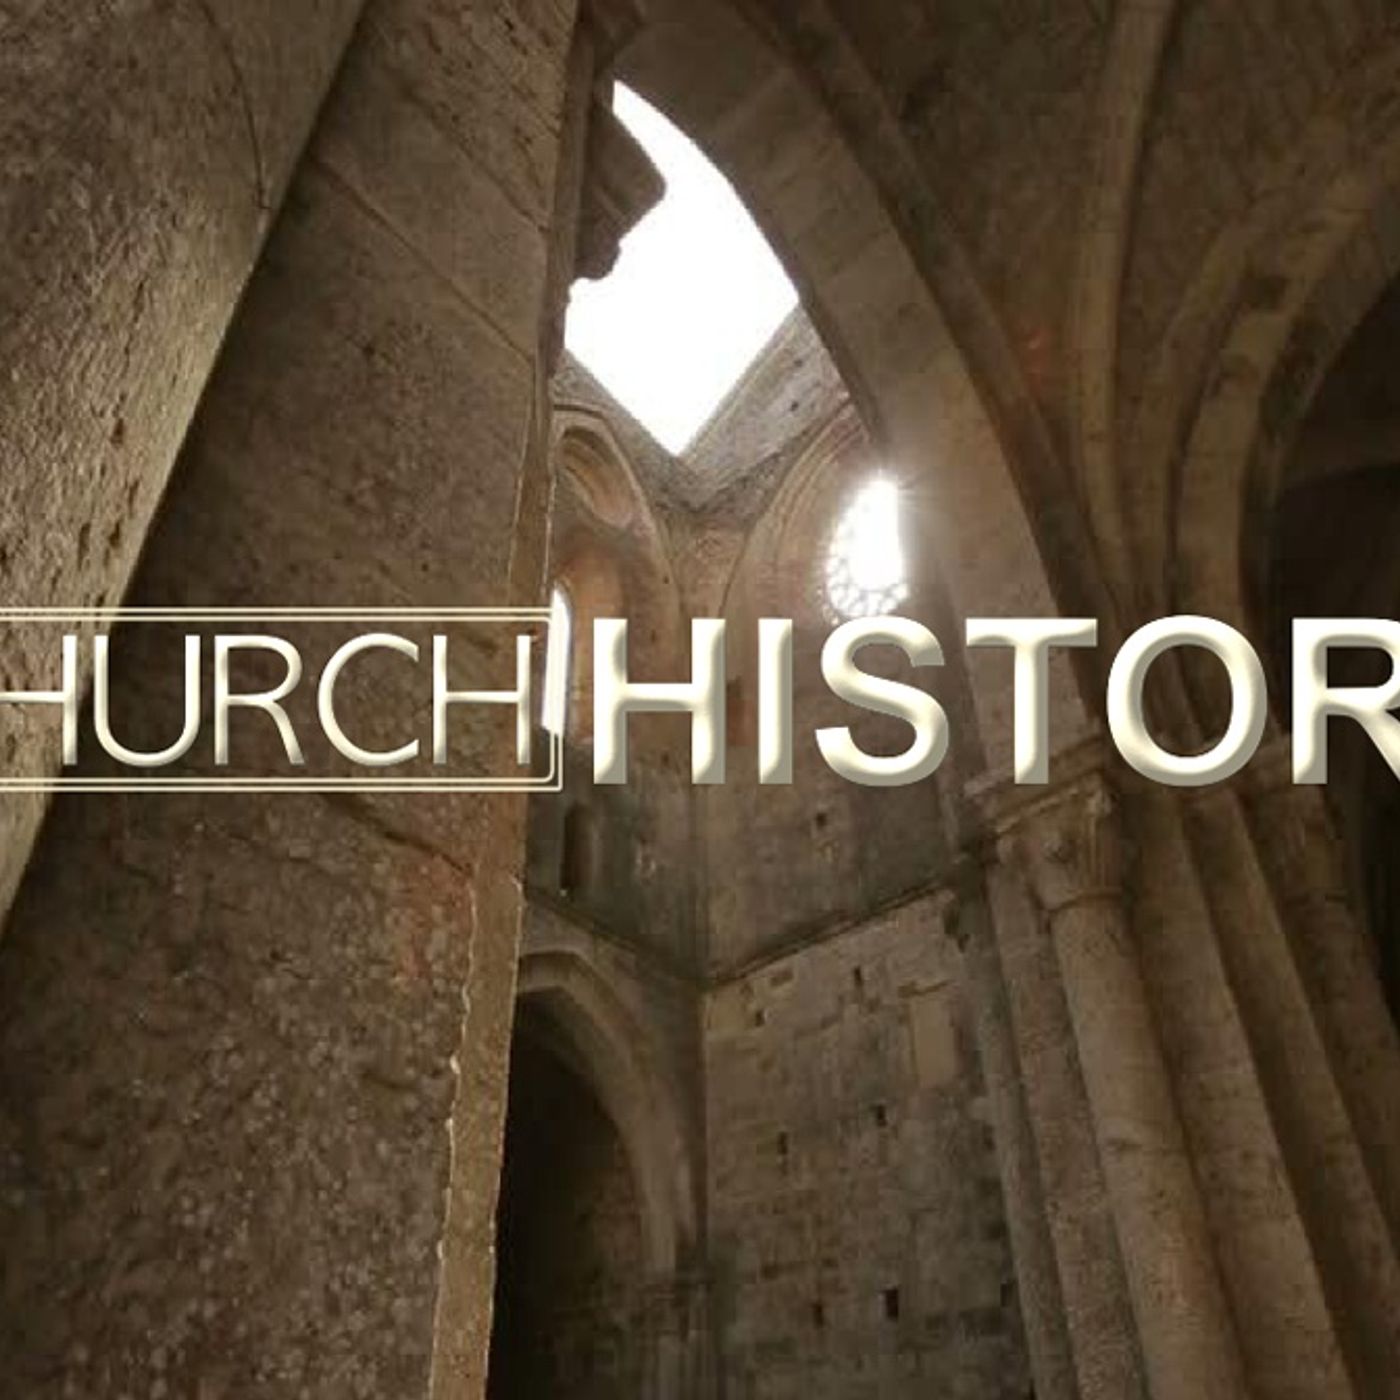 Some of the Best Church History Books